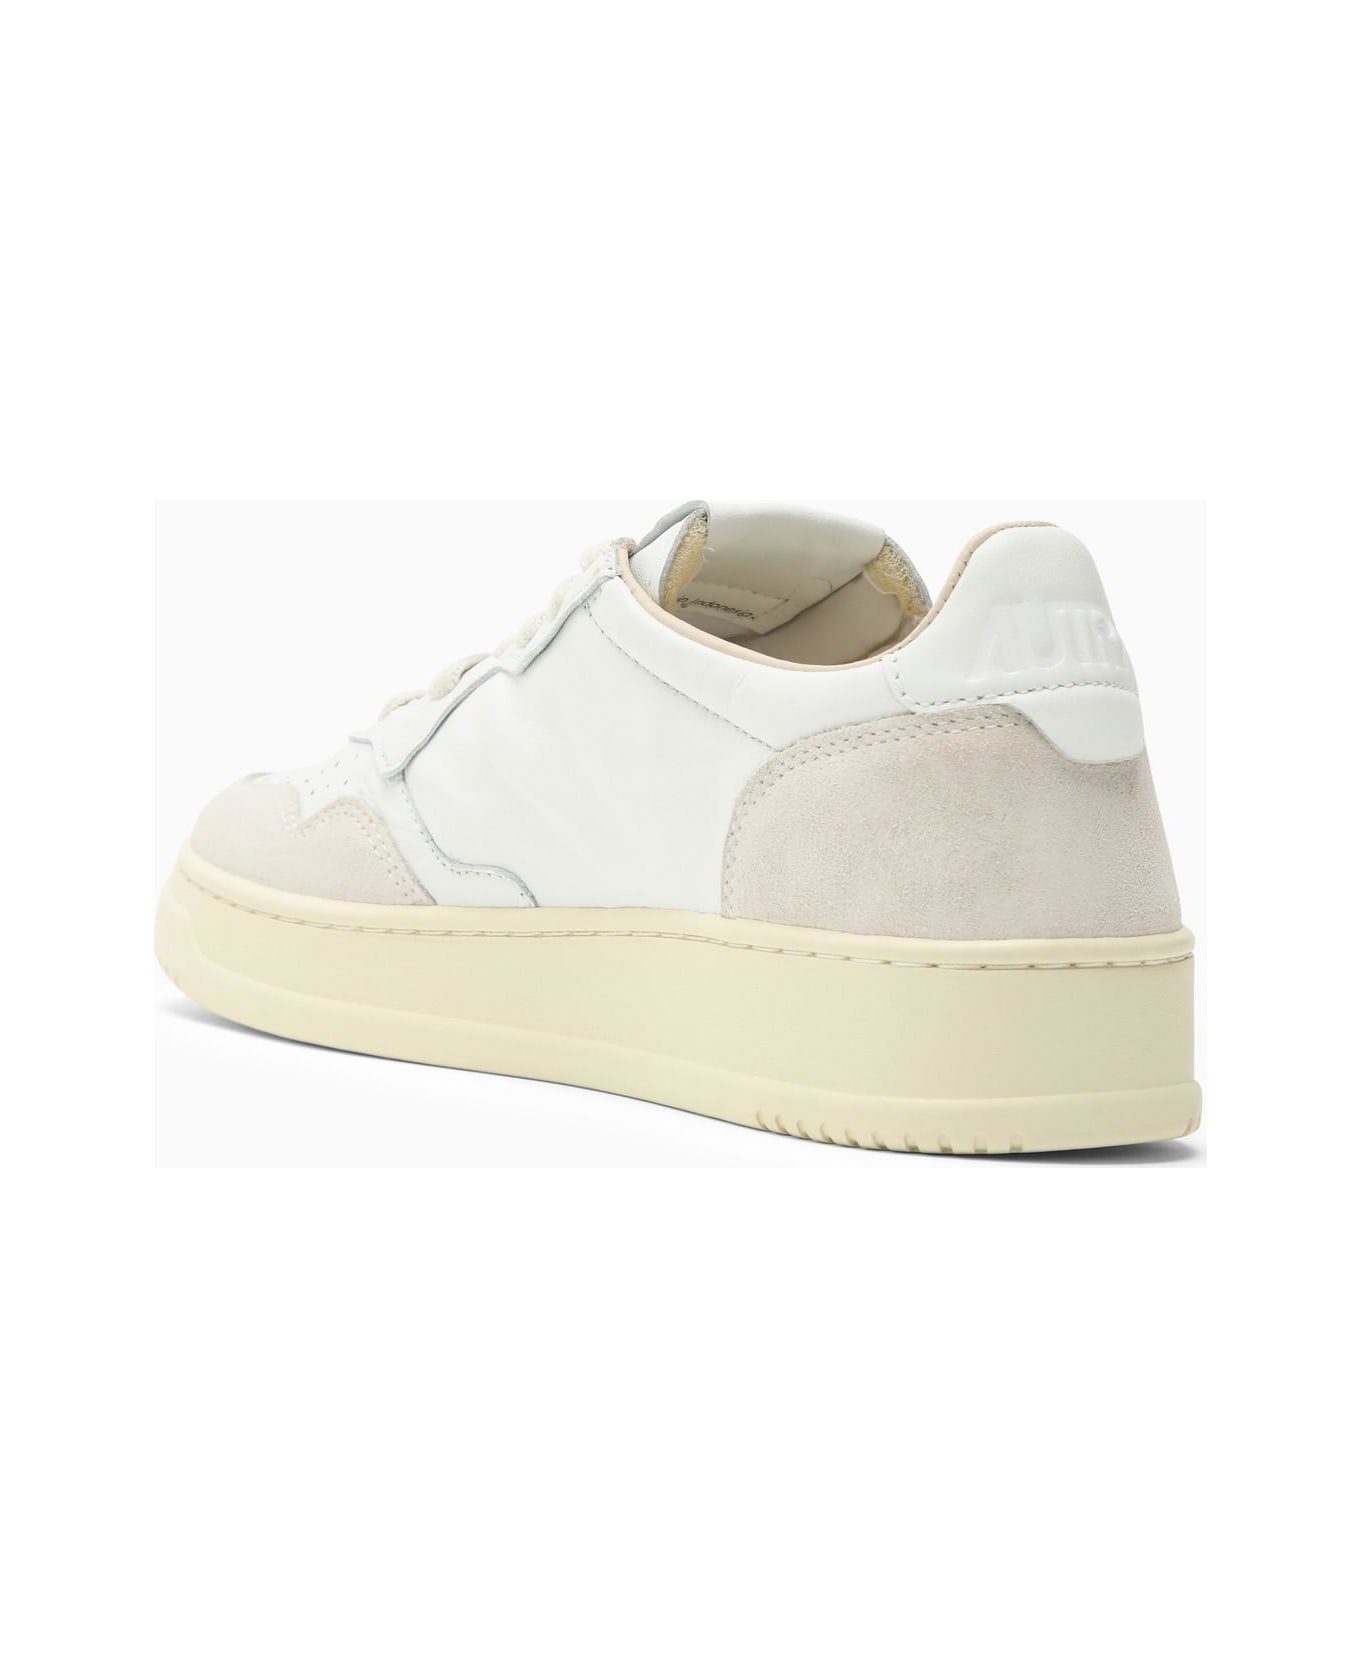 Autry Medalist Trainer In White Leather And Suede - White スニーカー